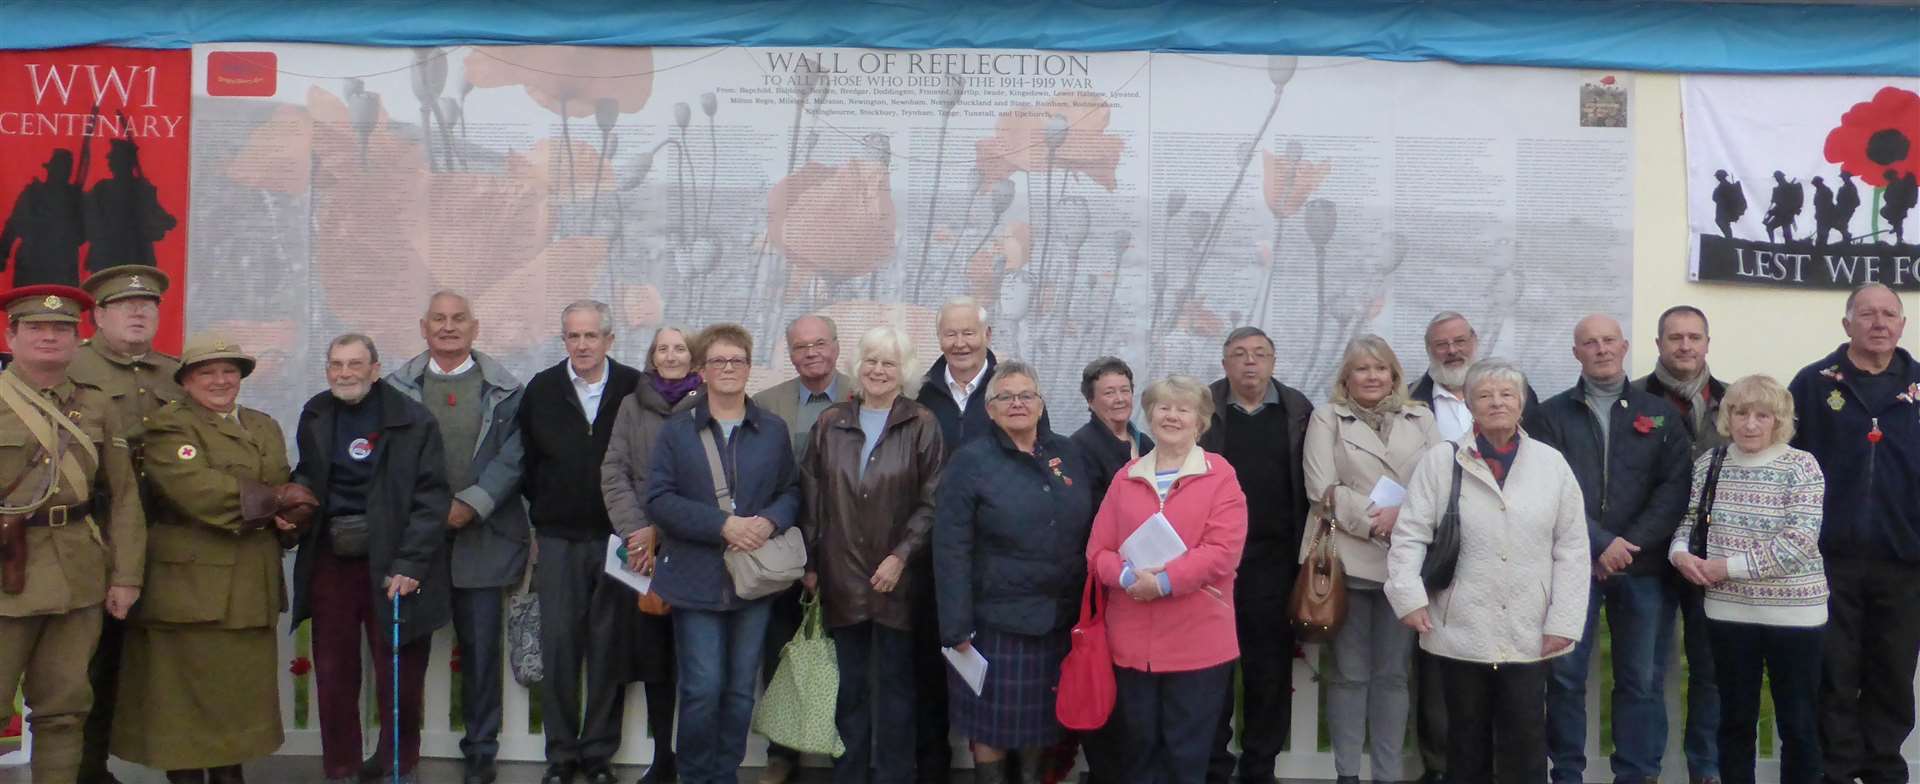 People gathered to watch the unveiling of the Wall of Reflection at The Forum. Picture: Historical Research Group of Sittingbourne